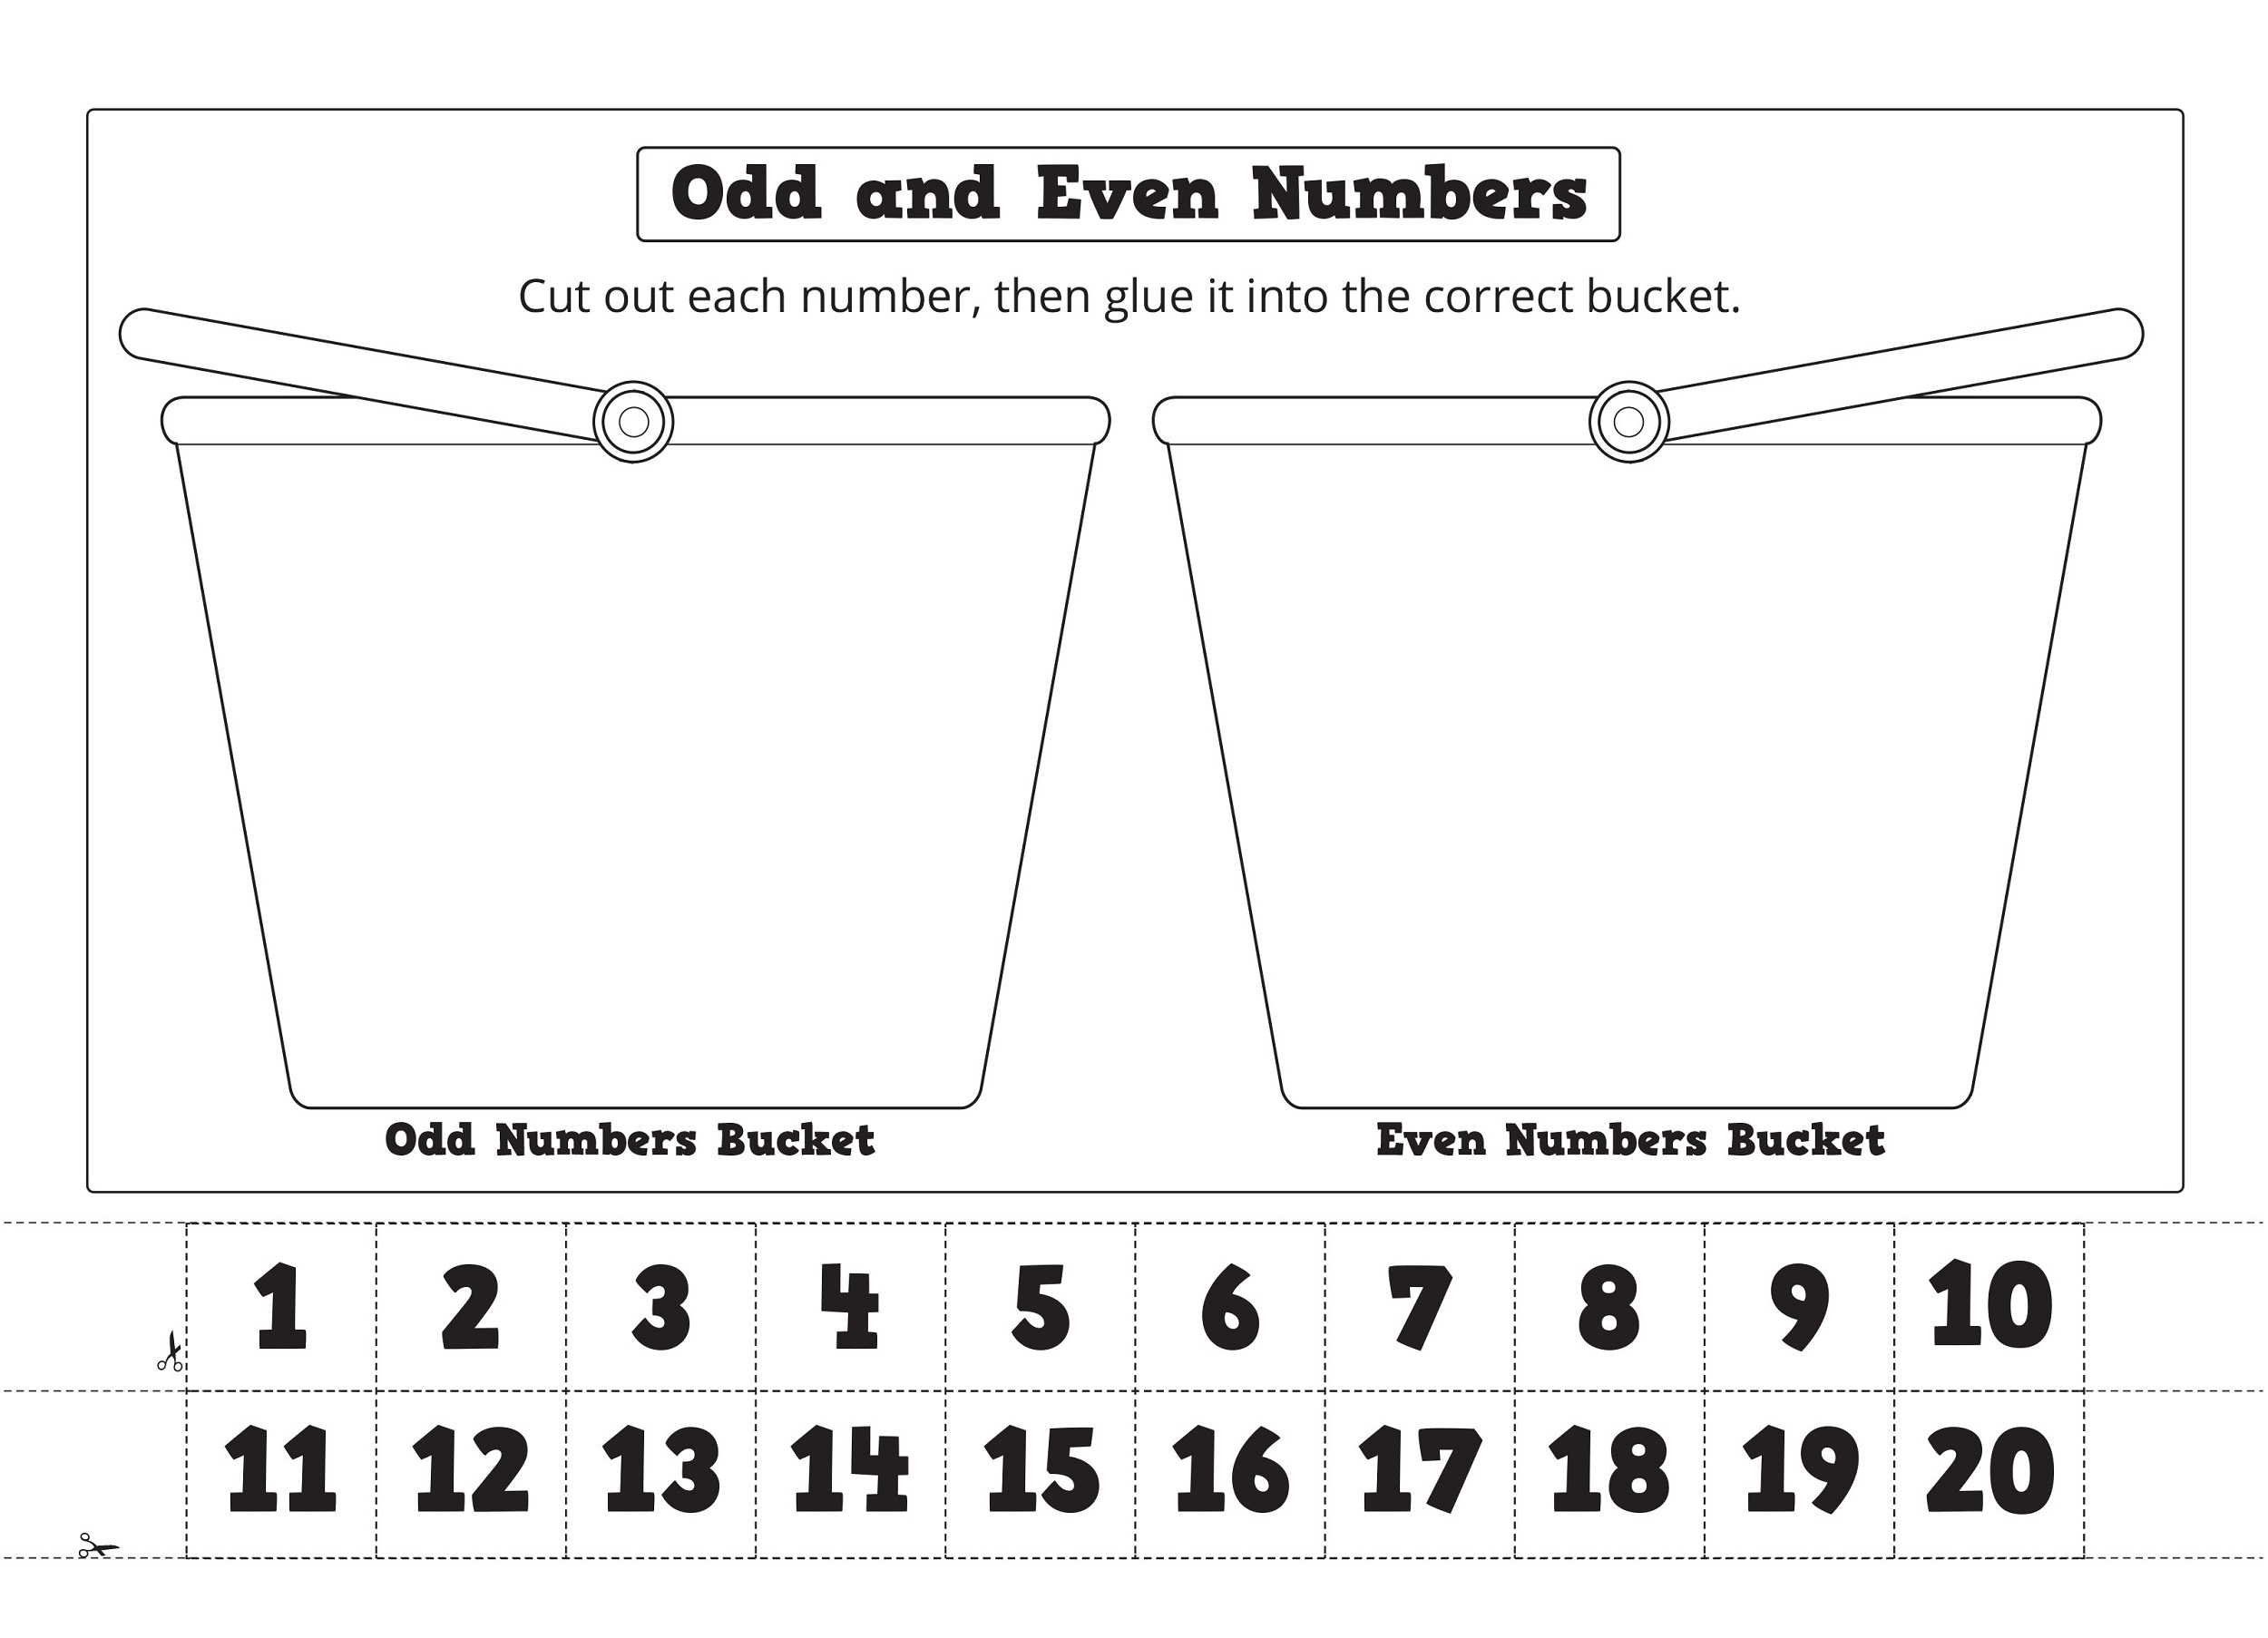 odd and even numbers worksheet pdf